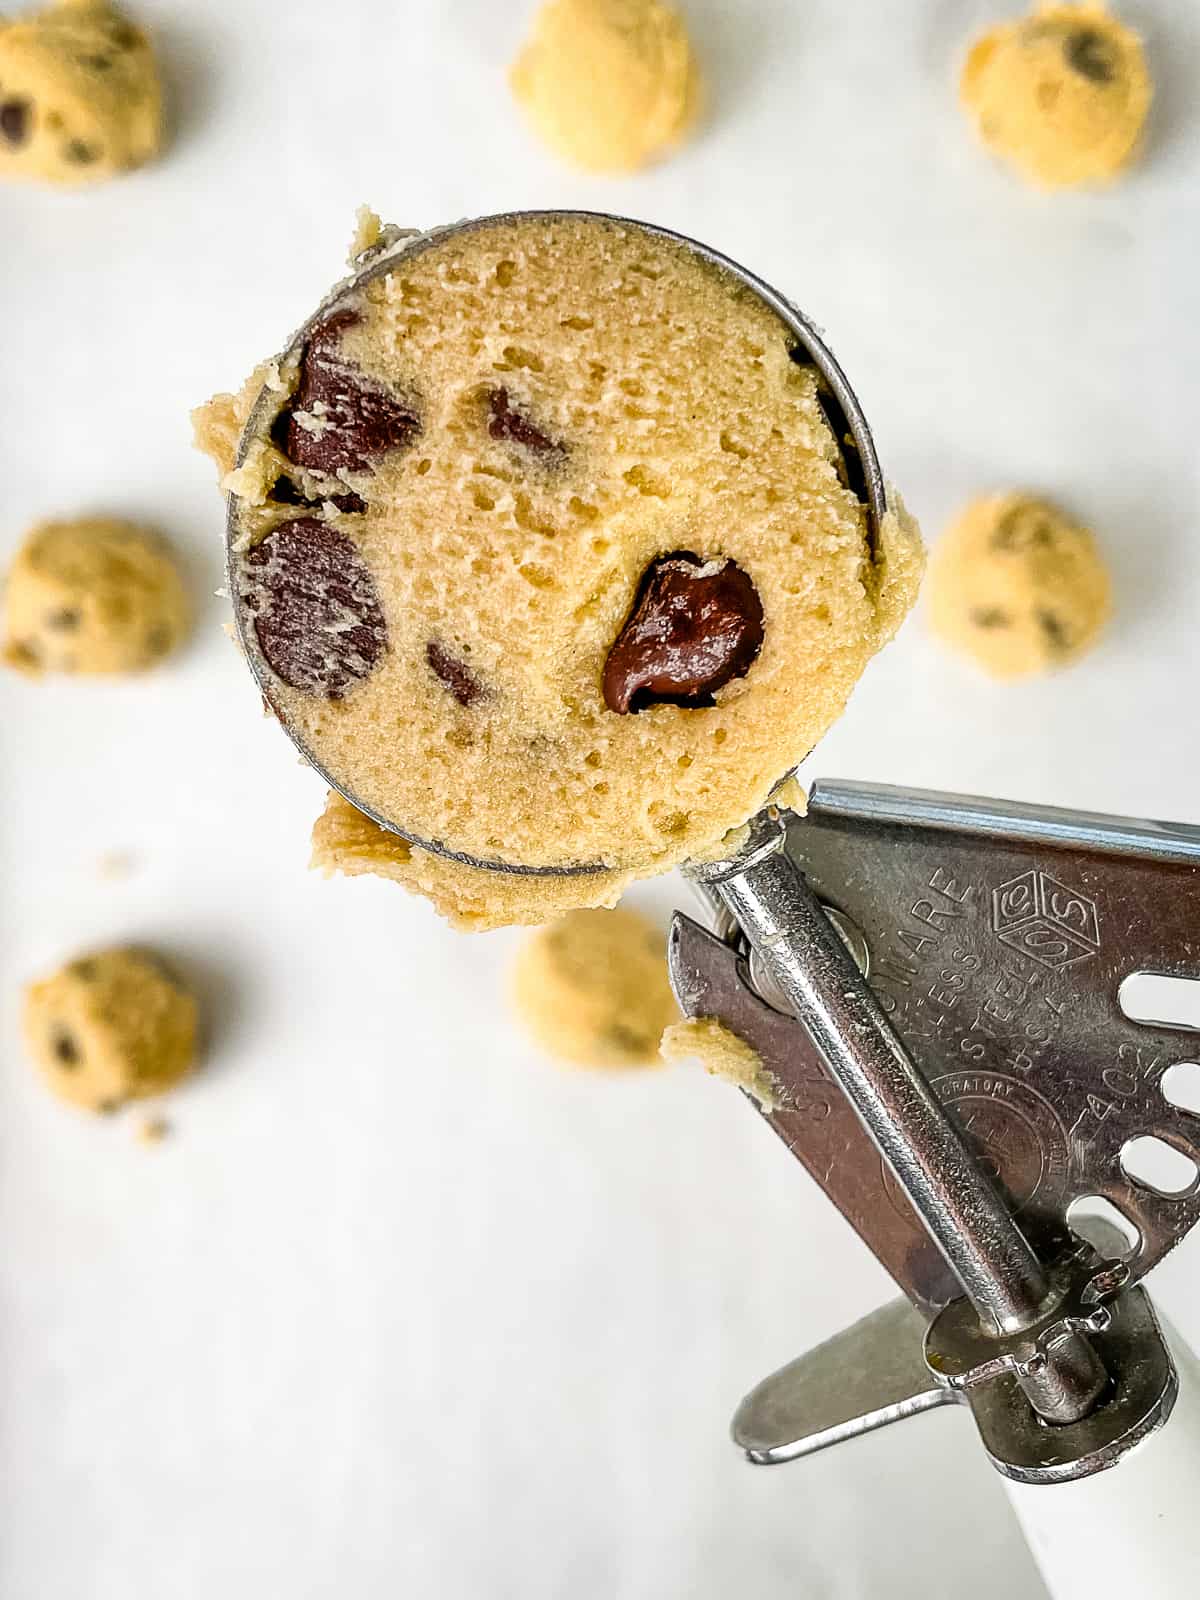 Cookie scoop filled with gluten-free chocolate chip cookie dough.